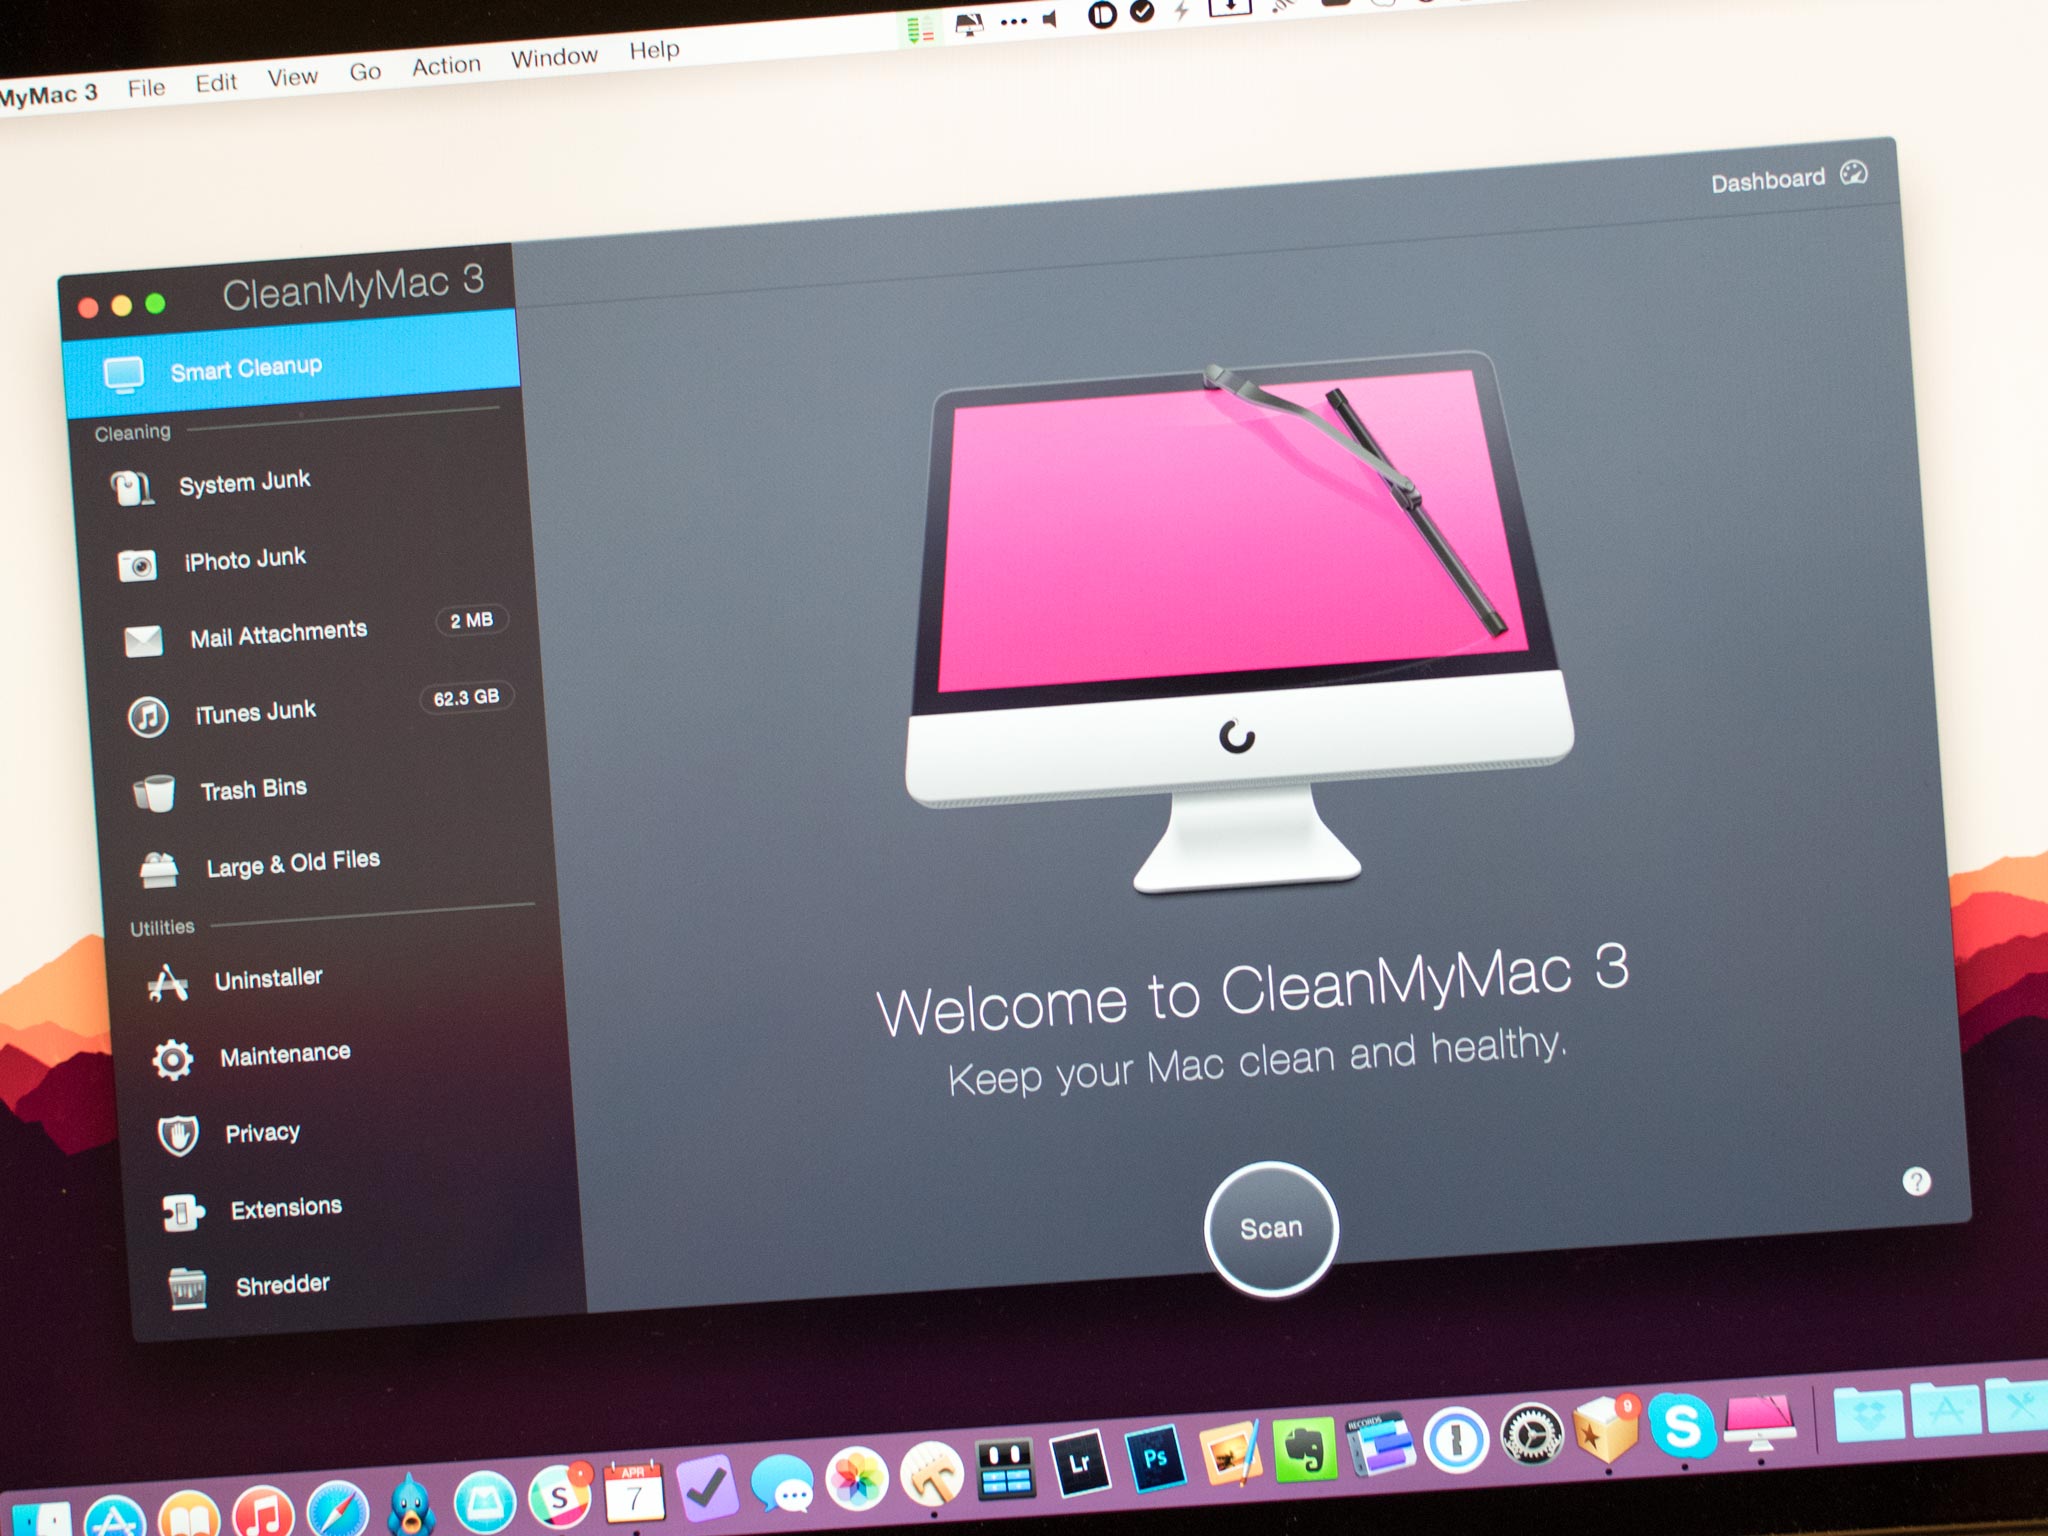 CleanMyMac 3 will clean your iTunes clutter, mail attachments, and more